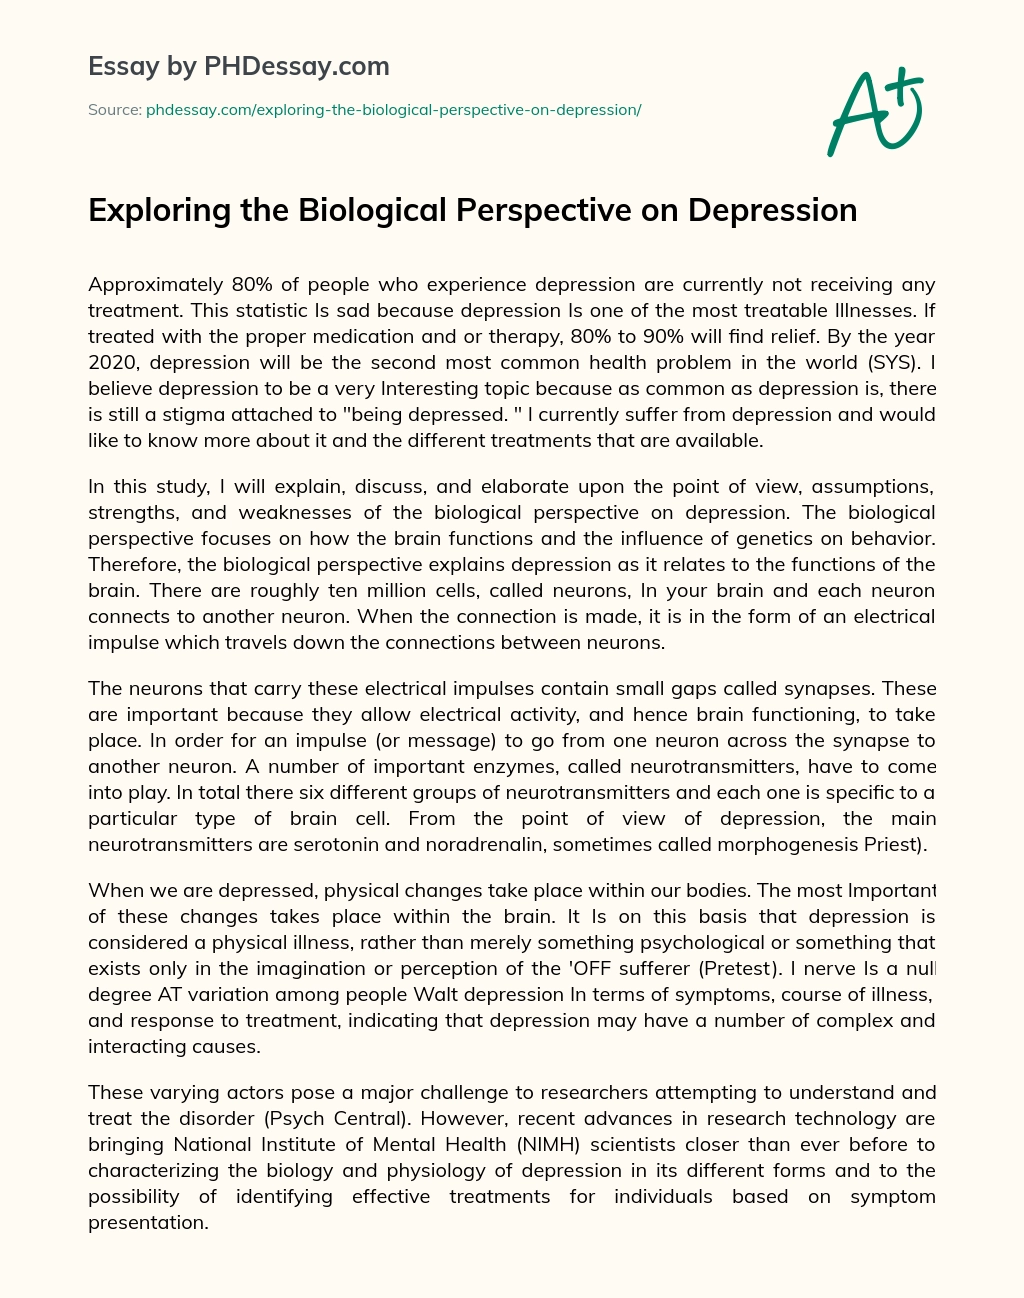 Exploring the Biological Perspective on Depression essay